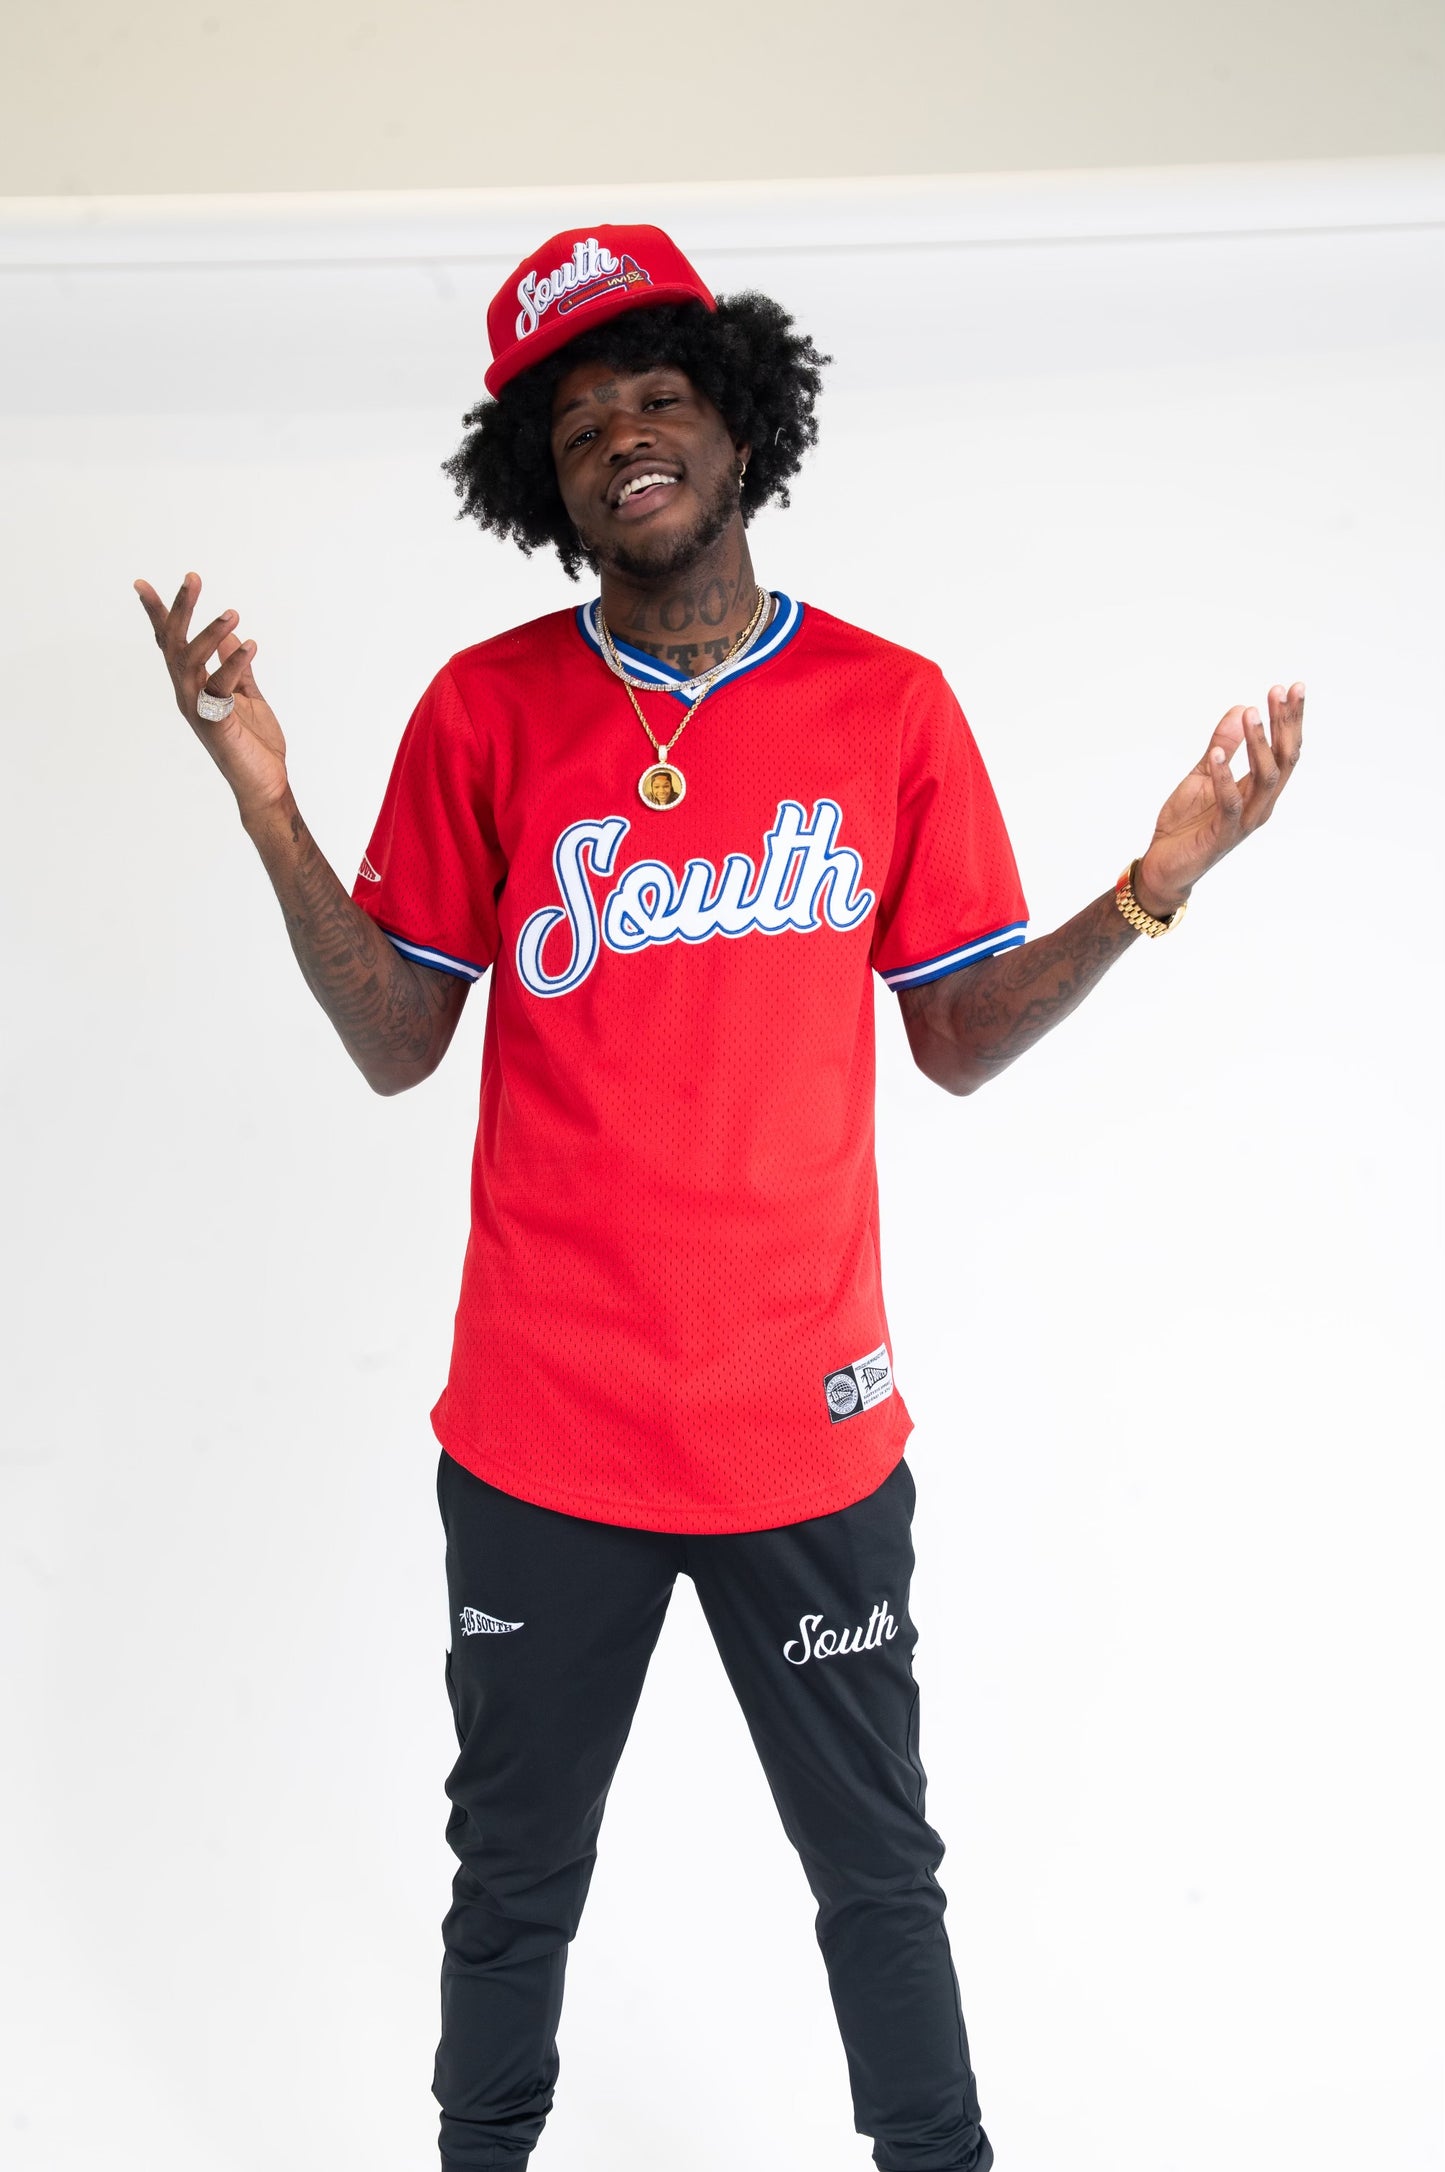 South Batting Jersey - Red